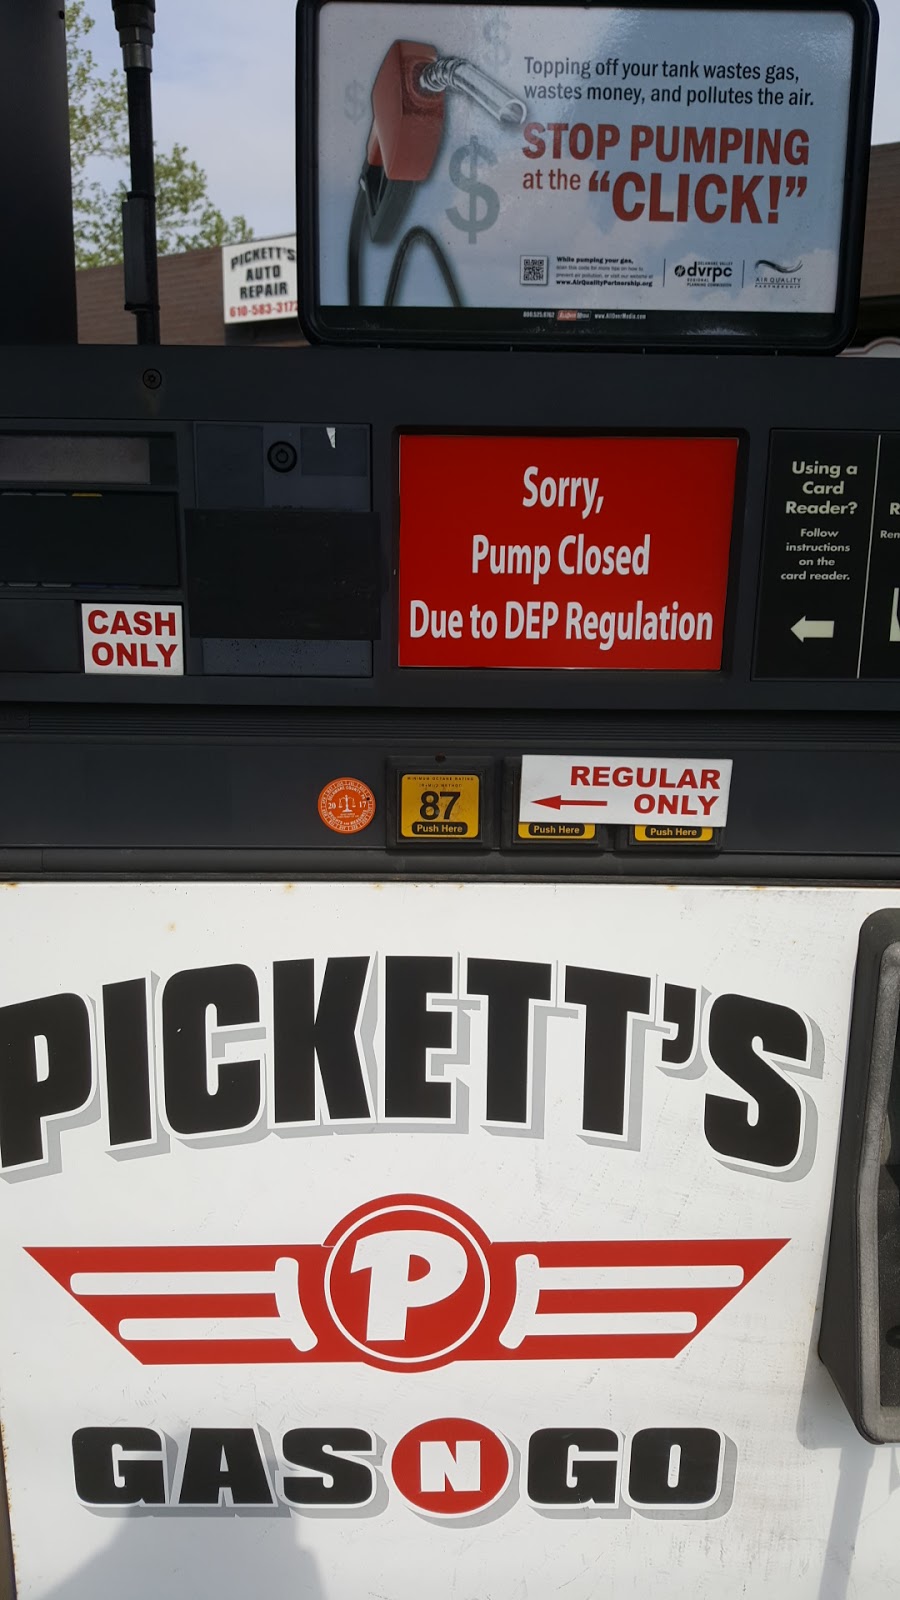 Picketts Automotive Repair | 24 S MacDade Blvd, Darby, PA 19023 | Phone: (610) 583-3172